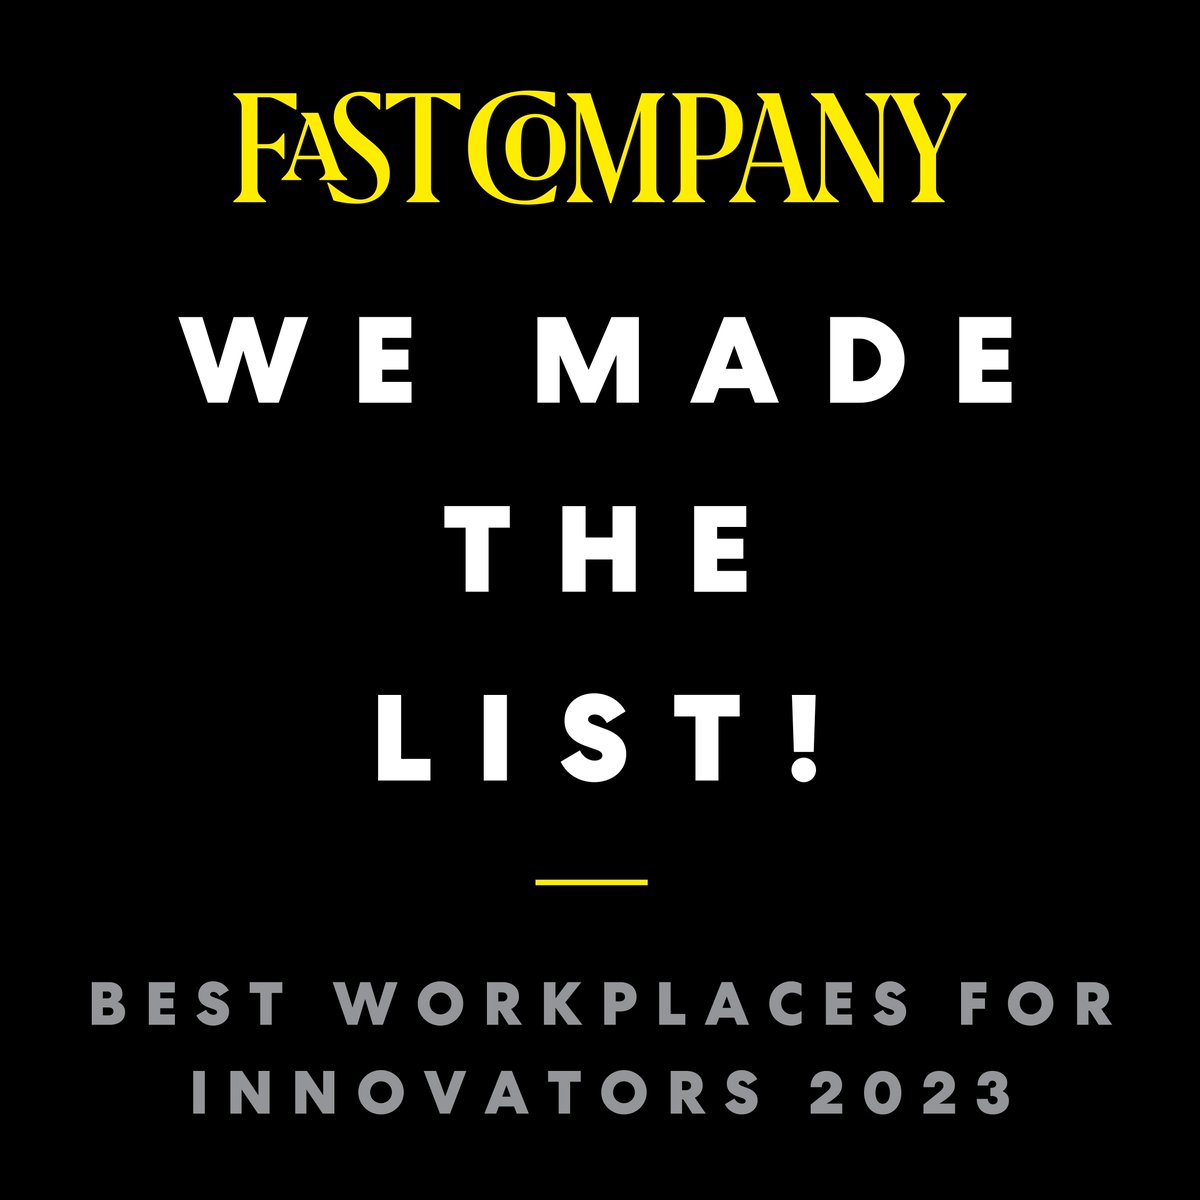 Innovators? You bet. Thanks @FastCompany for recognizing @AmFam as one of the Best Workplaces for Innovators 2023! #FCBestWorkplaces  #iWork4AmFam